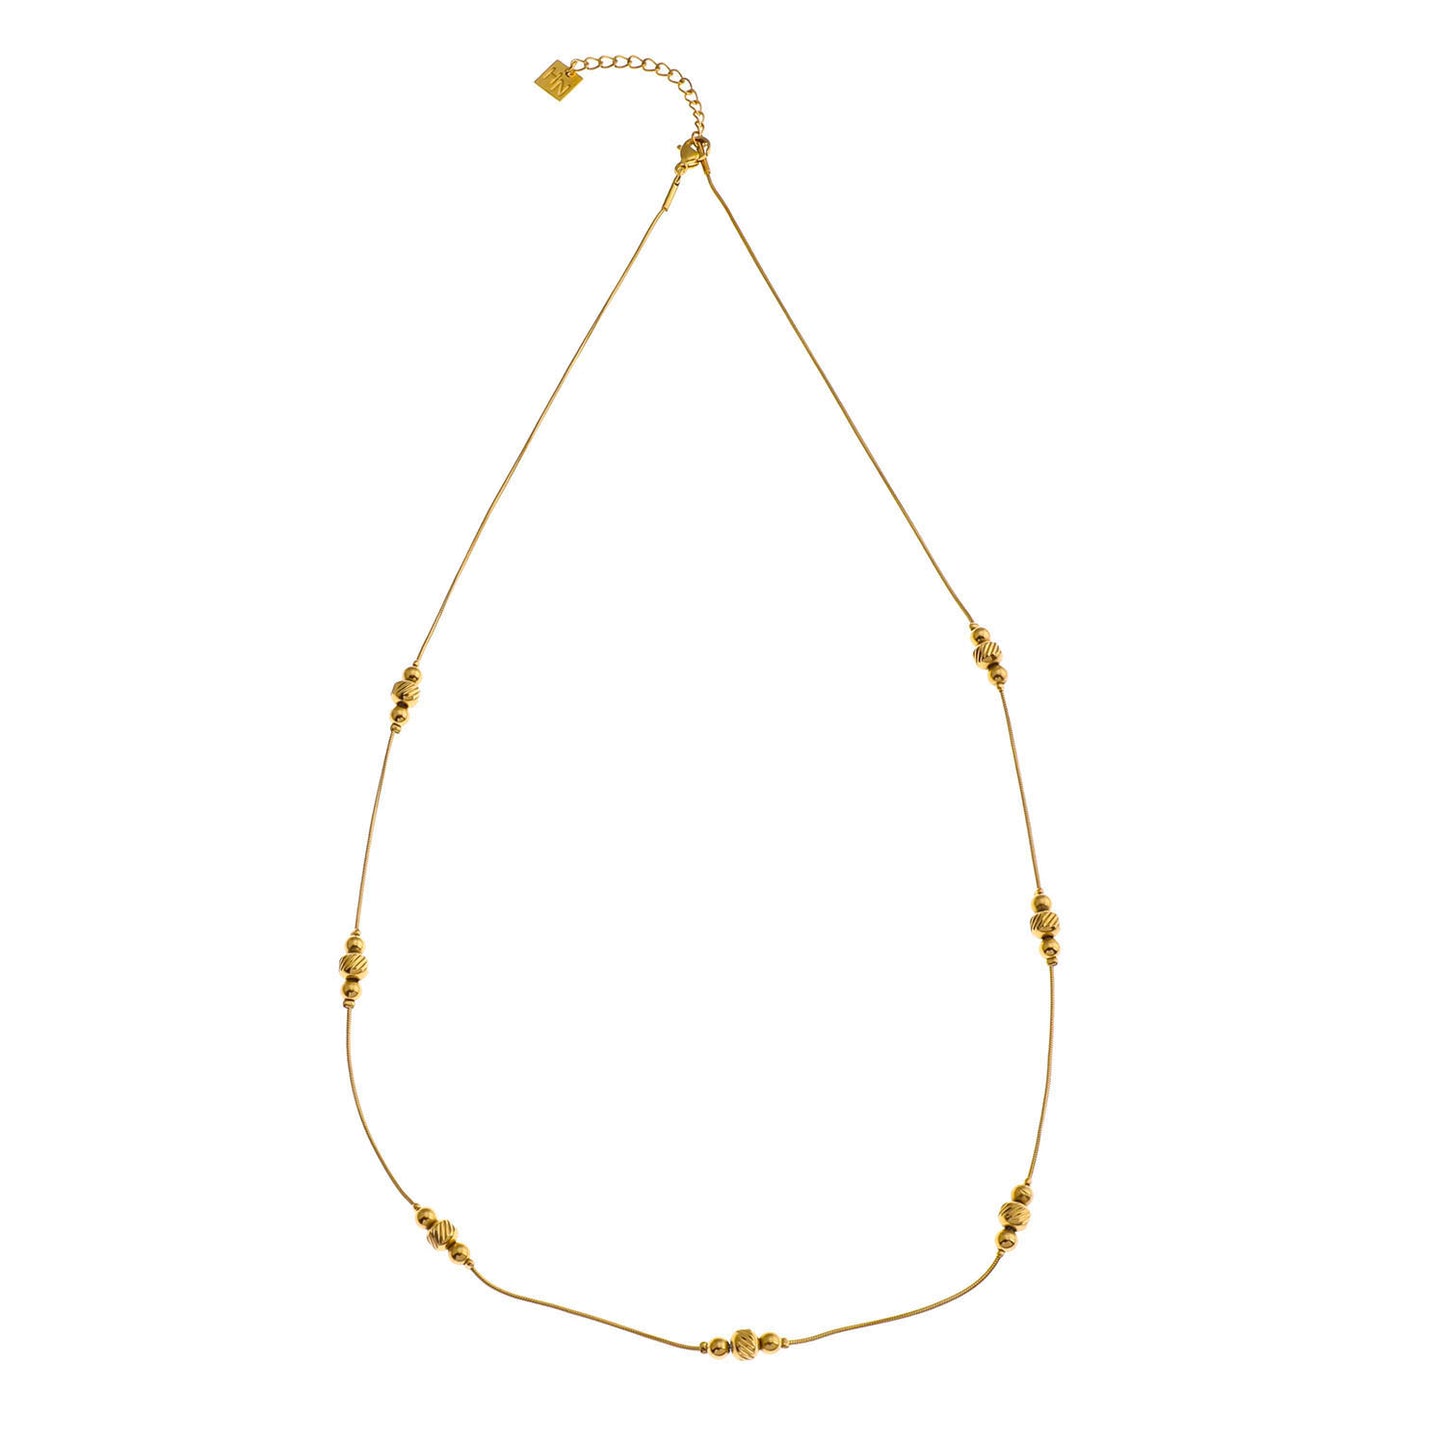 PAULINA Delicate Beaded Chain Necklace